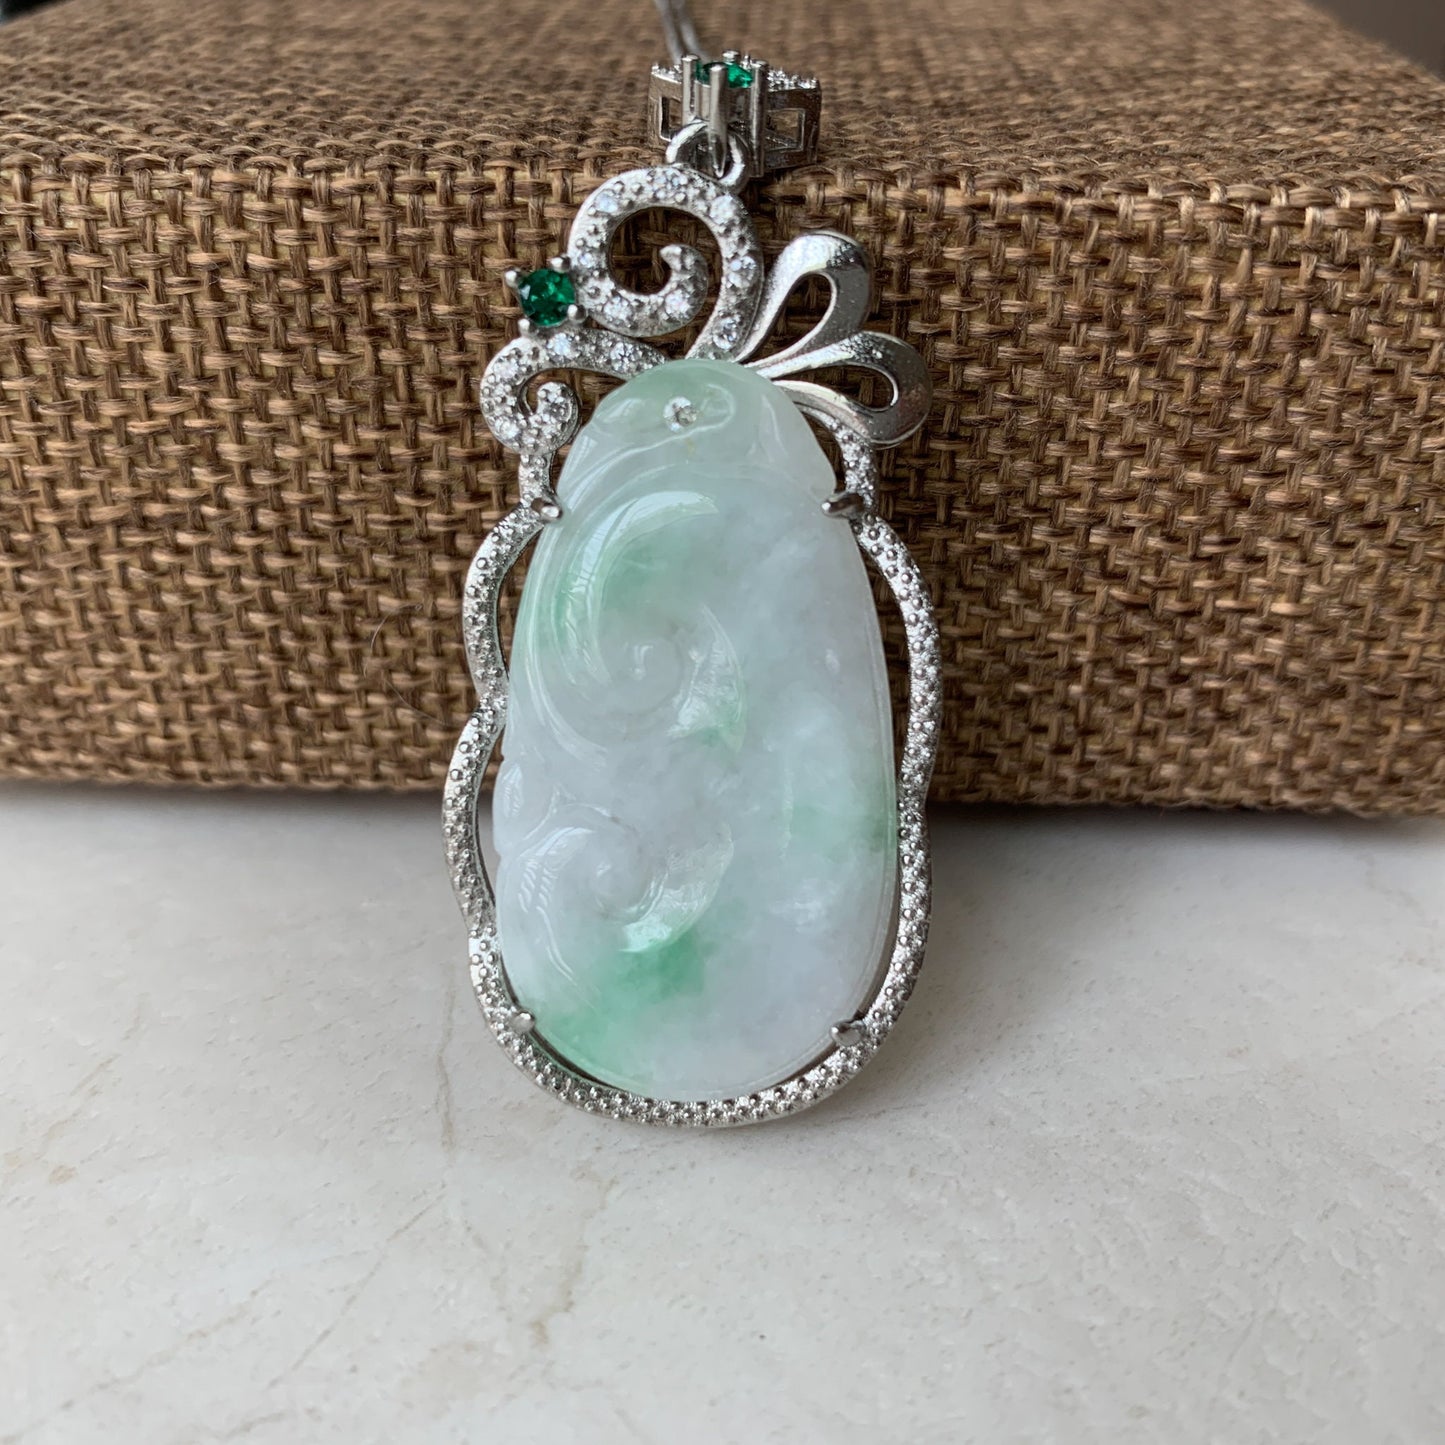 Jadeite Jade Lucky Ruyi Ru Yi, 如意, Sterling Silver Pendant Hand Carved Necklace, BJ-0621-0003439-3 - AriaDesignCollection